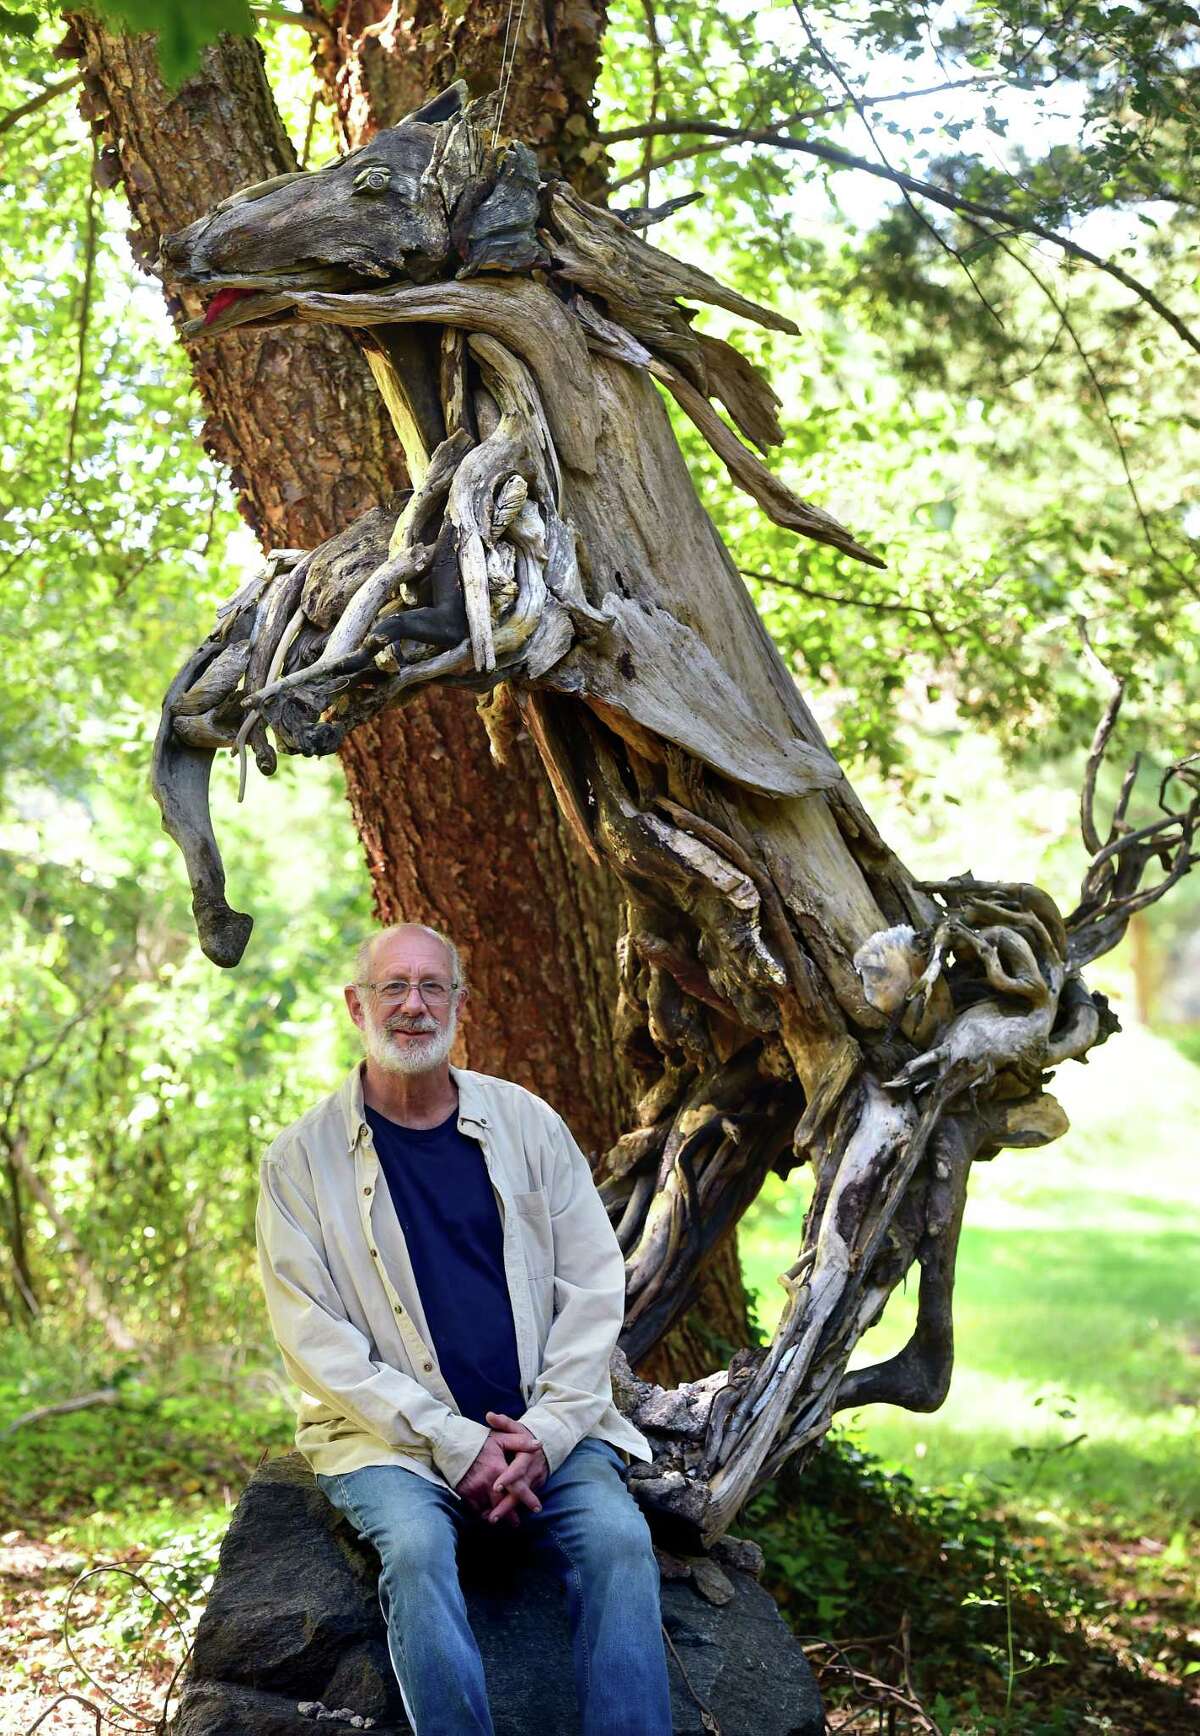 Alan Horwitz is photographed in a Stony Creek park with a horse sculpture, Denali, he made using driftwood .